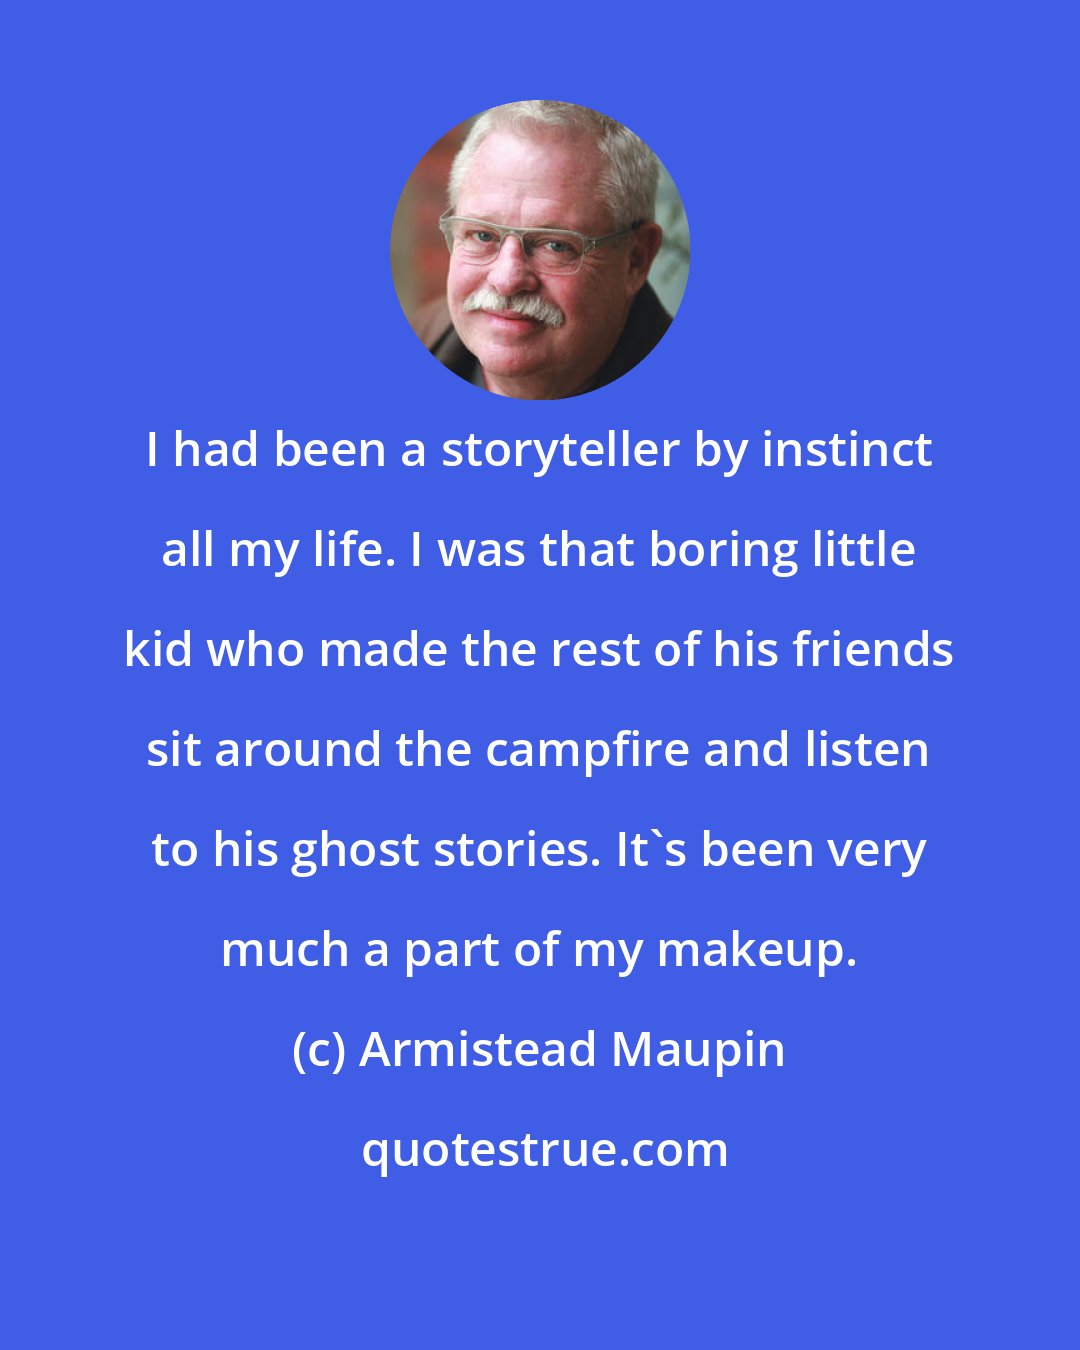 Armistead Maupin: I had been a storyteller by instinct all my life. I was that boring little kid who made the rest of his friends sit around the campfire and listen to his ghost stories. It's been very much a part of my makeup.